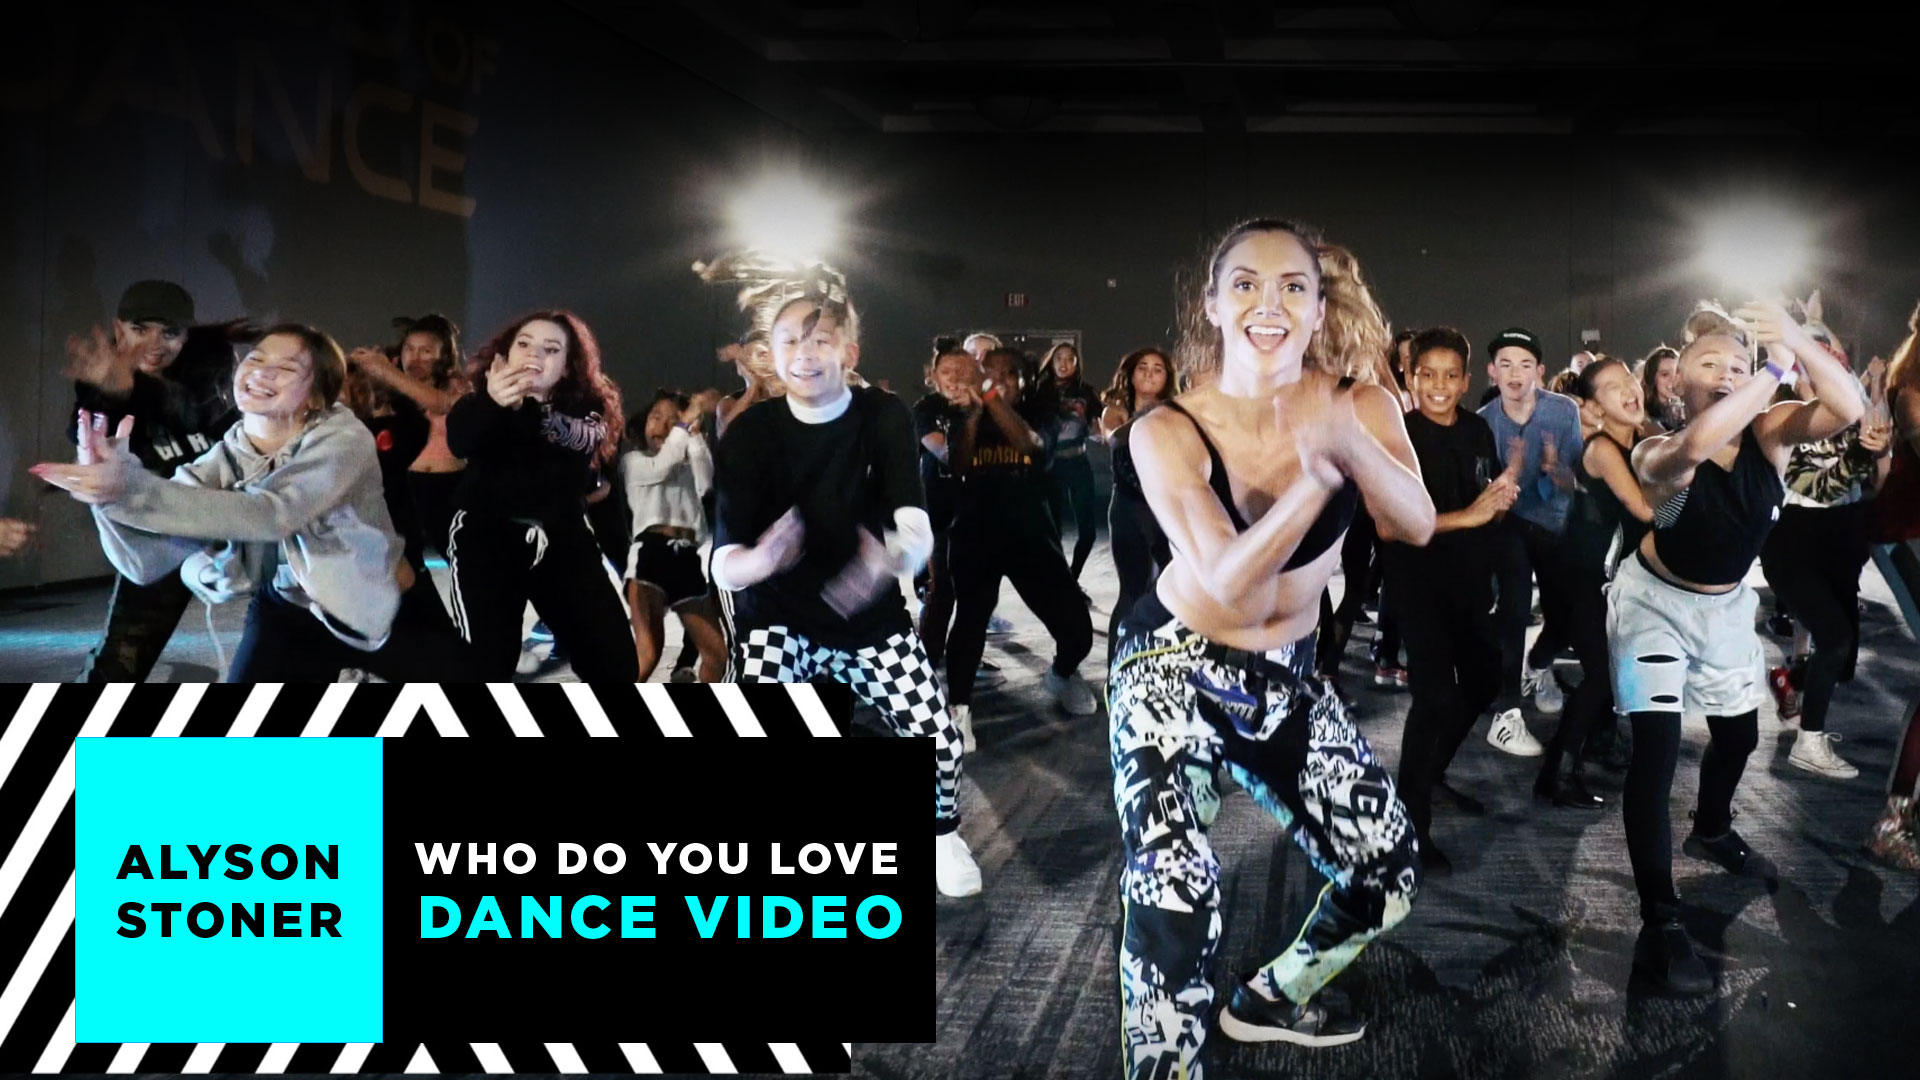 World Of Dance Releases Alyson Stoner's Newest Video for “Who Do You Love”  | Str8jacket Dance Company